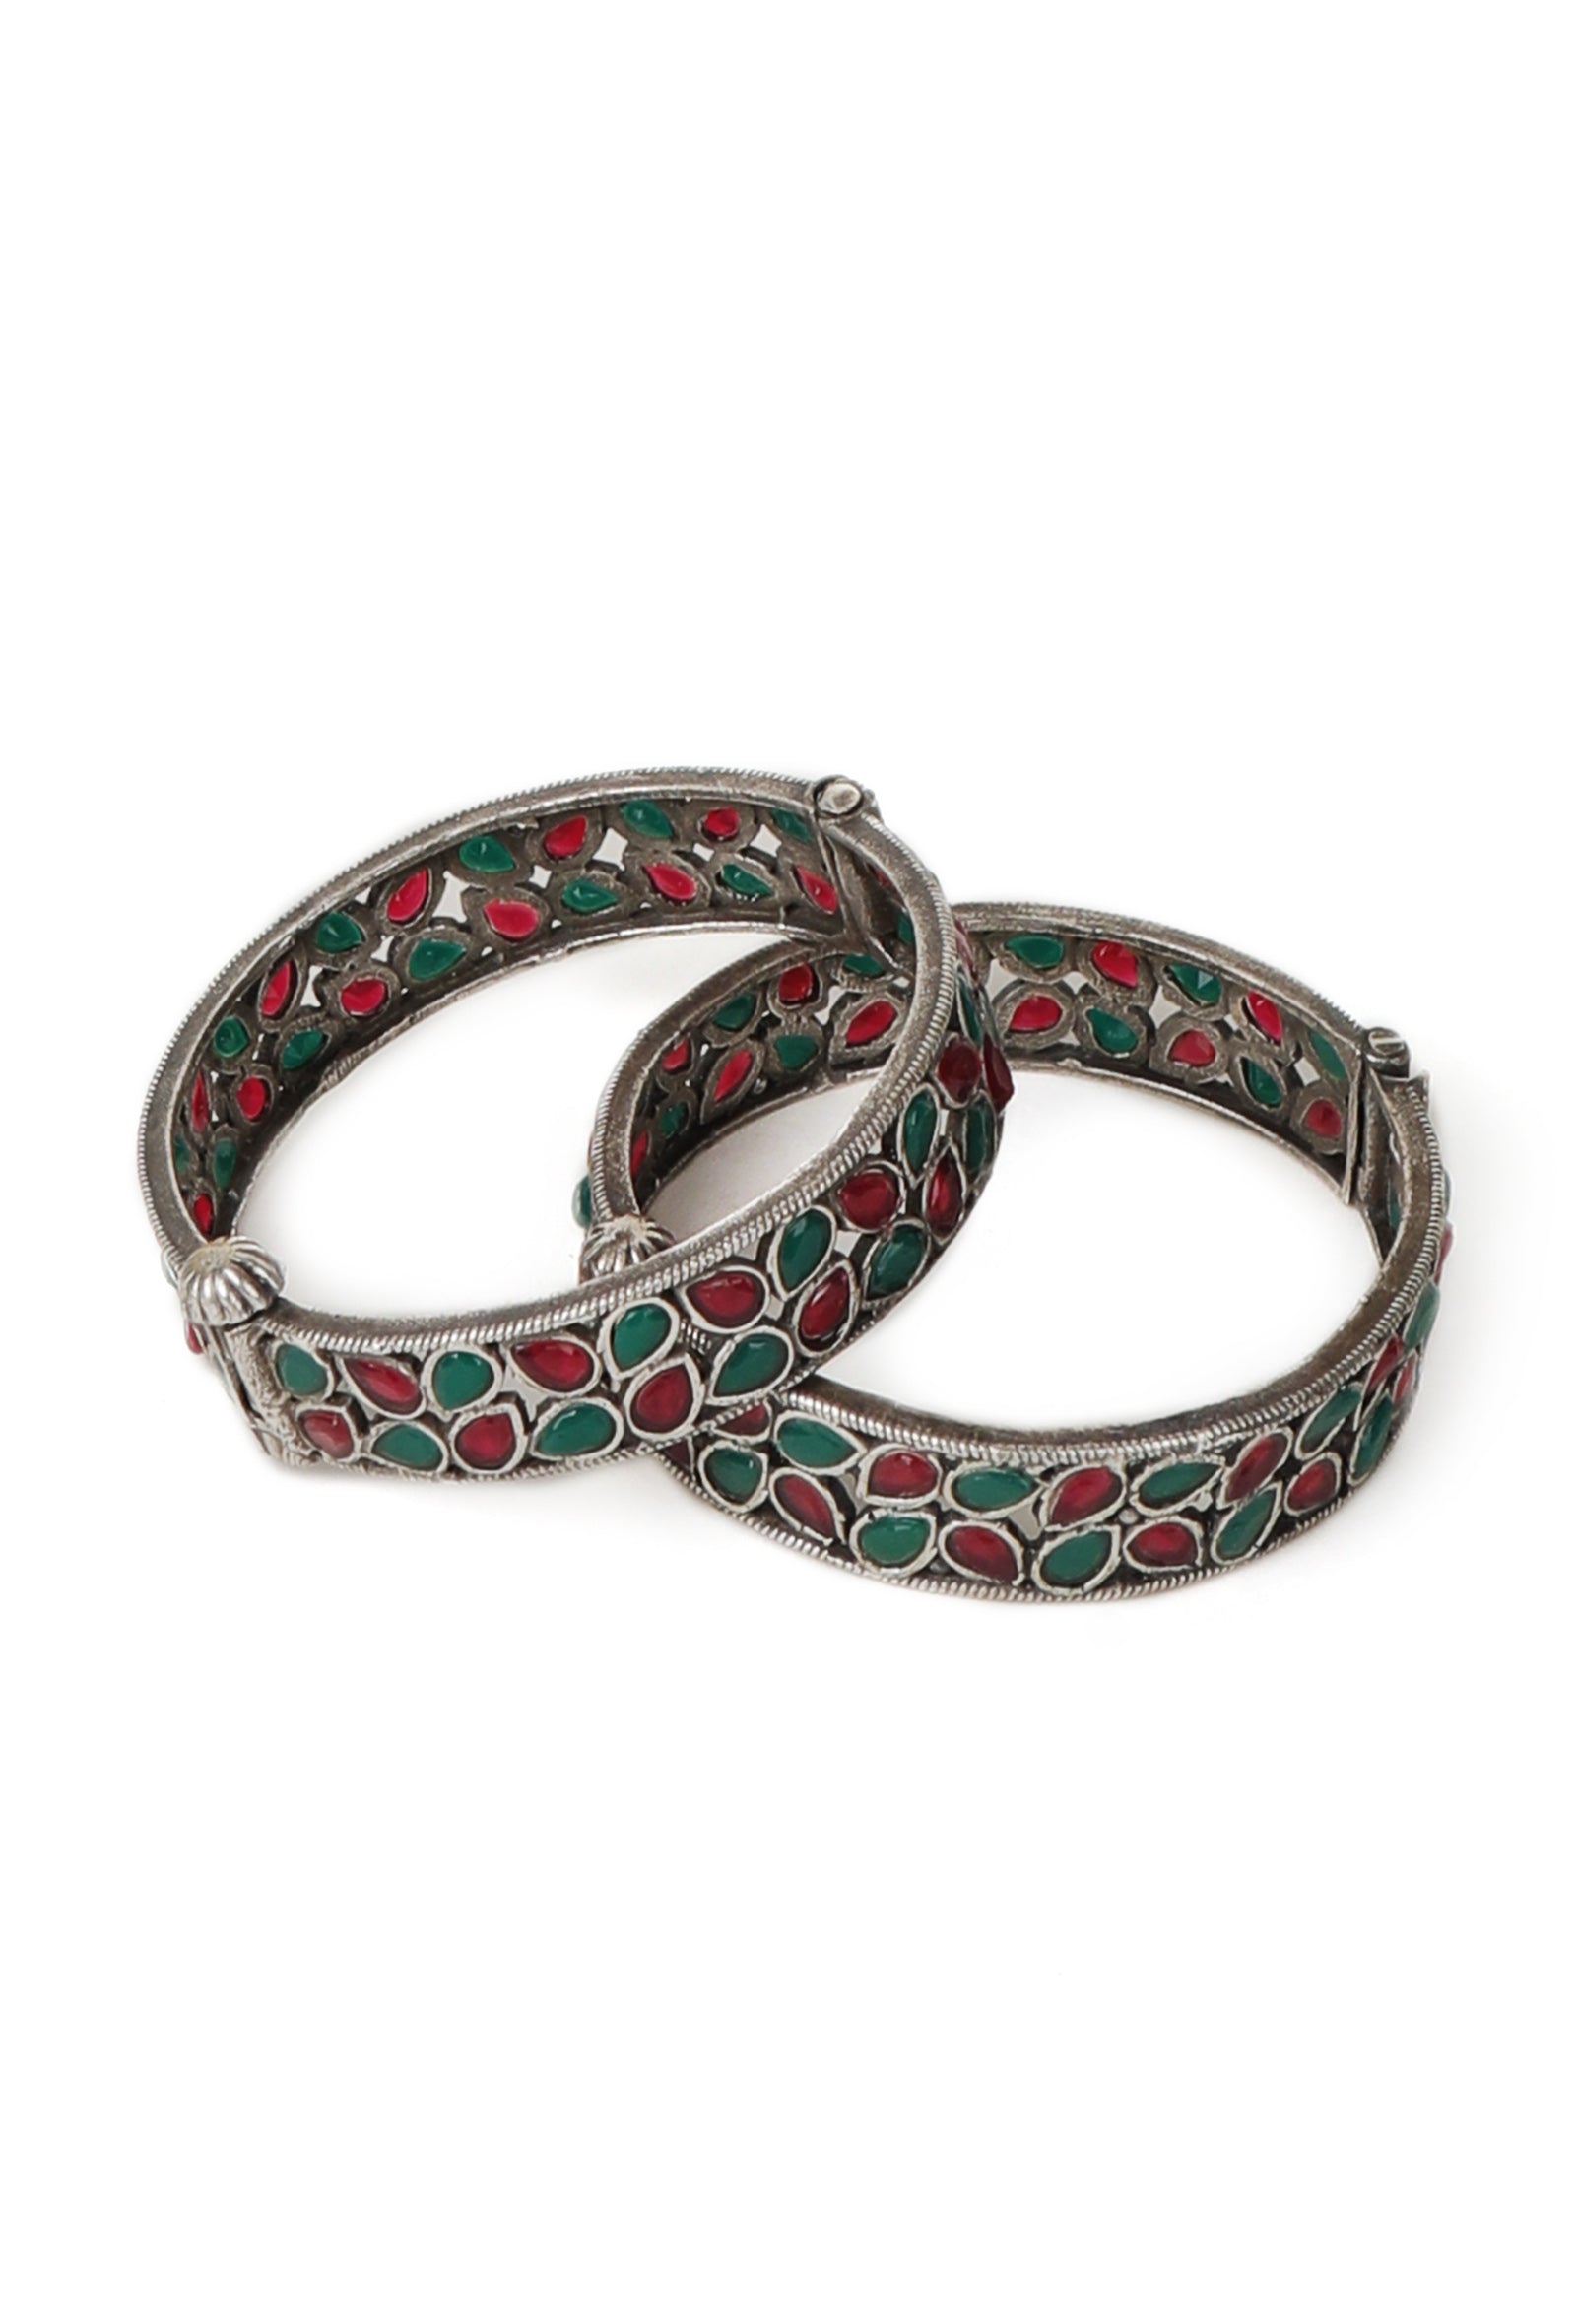 Oxidized Silver Bangle Set With Green & Red Stones